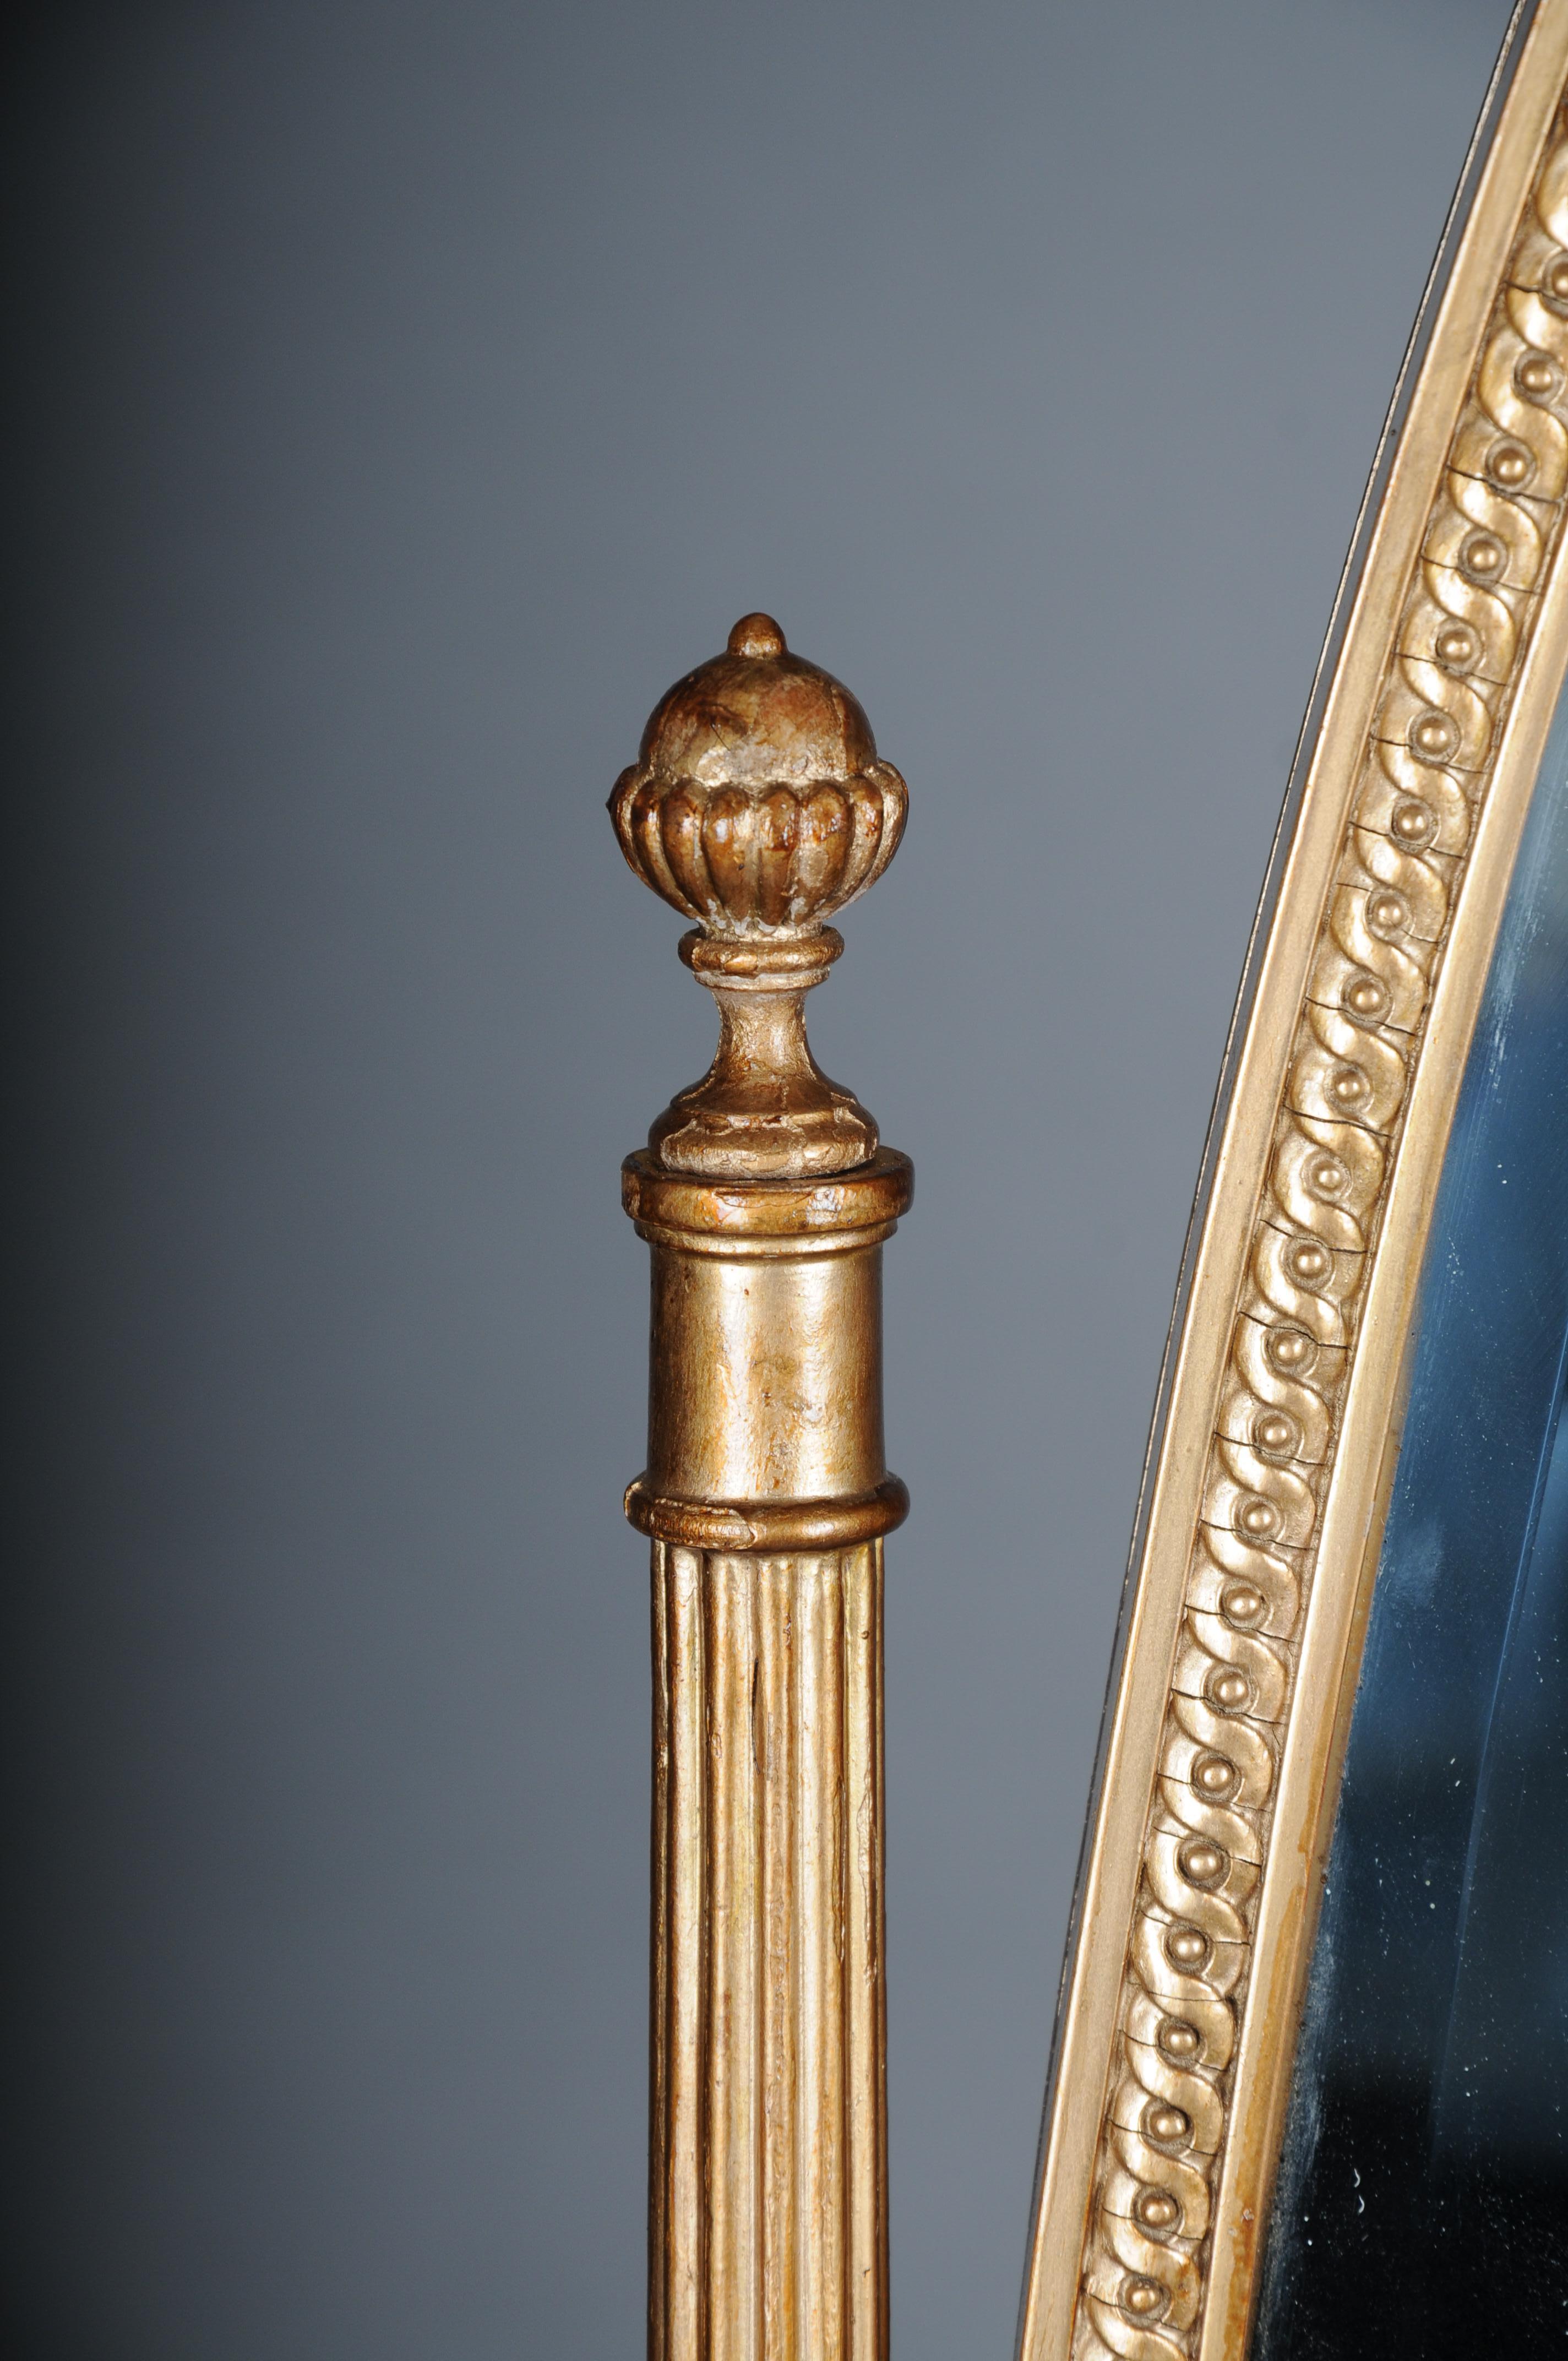 Noble gilded Louis XVI standing mirror around 1880s,

Solid wood completely gilded and richly decorated. Framed oval mirror. Rotating mirror. Firm stand stands on four curved legs.

France from 1880s